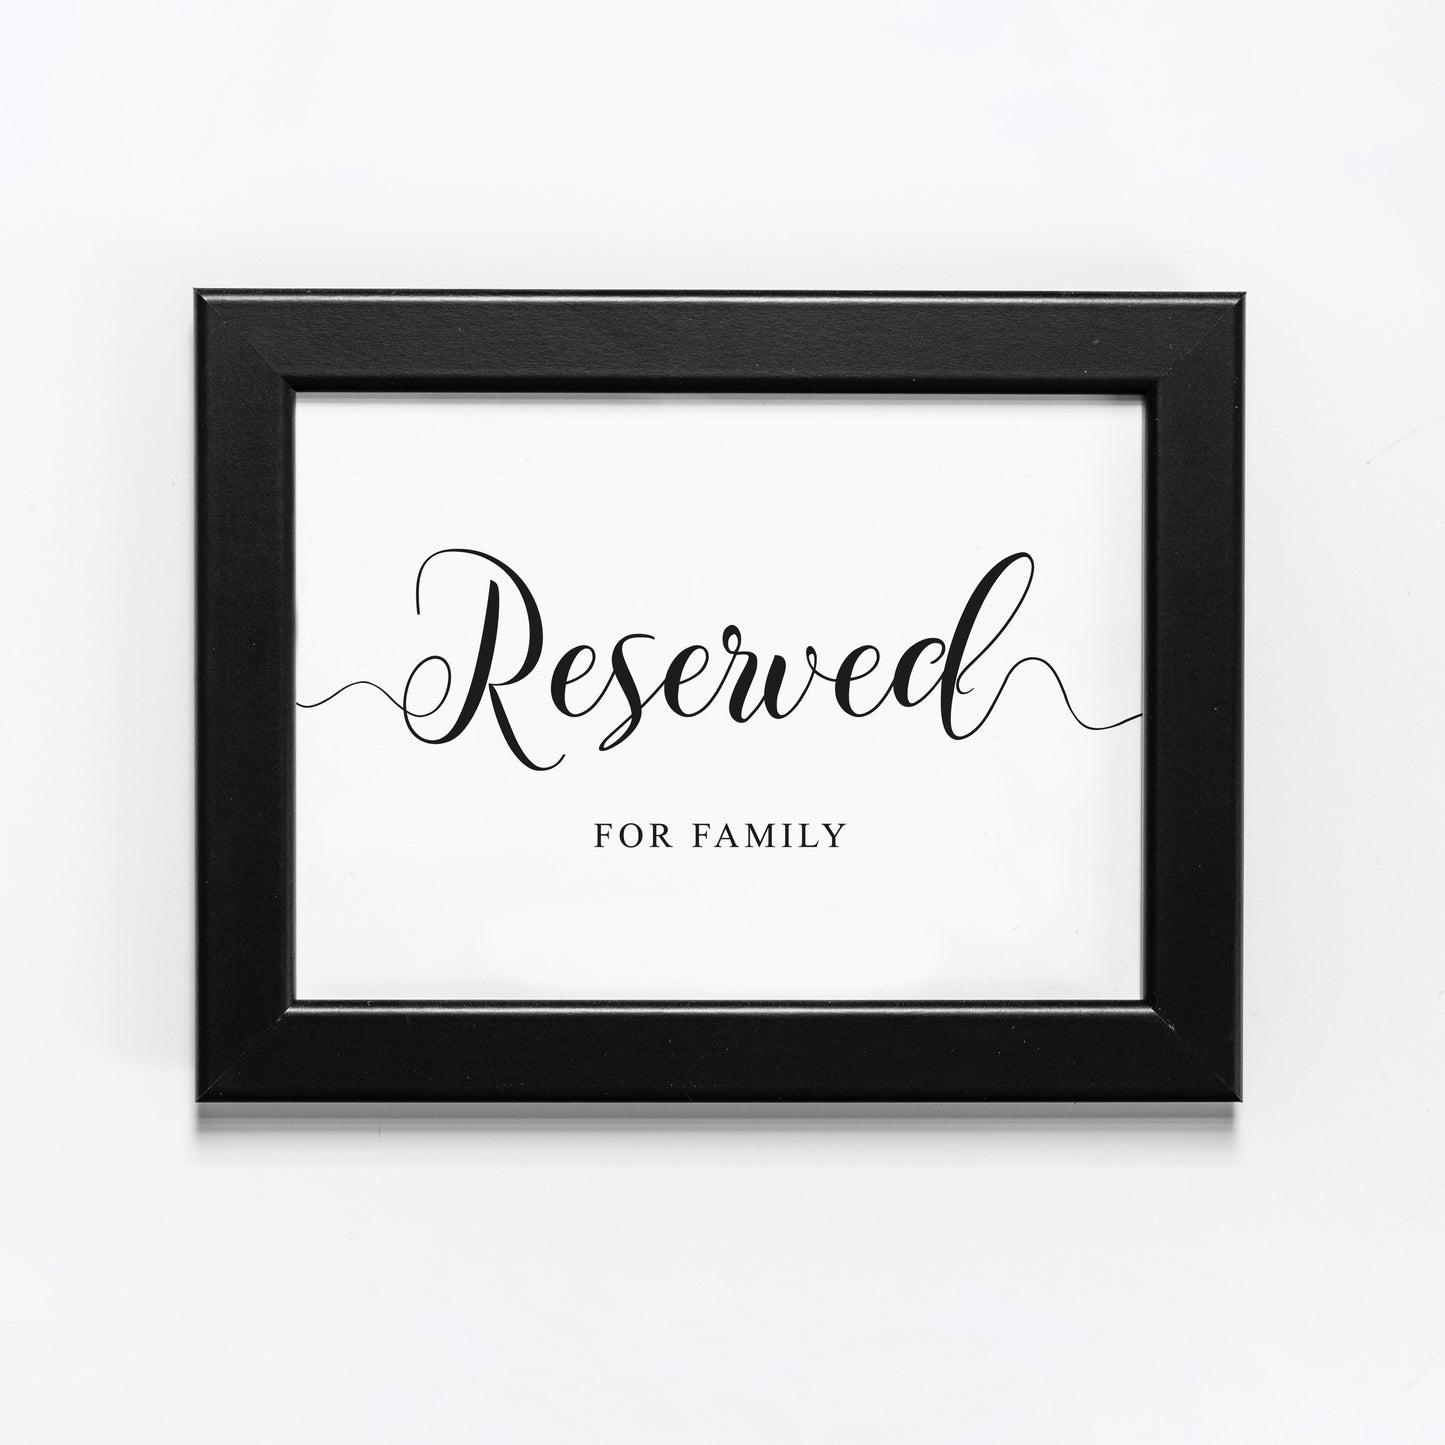 These seats are reserved for family 8x10 wedding signage